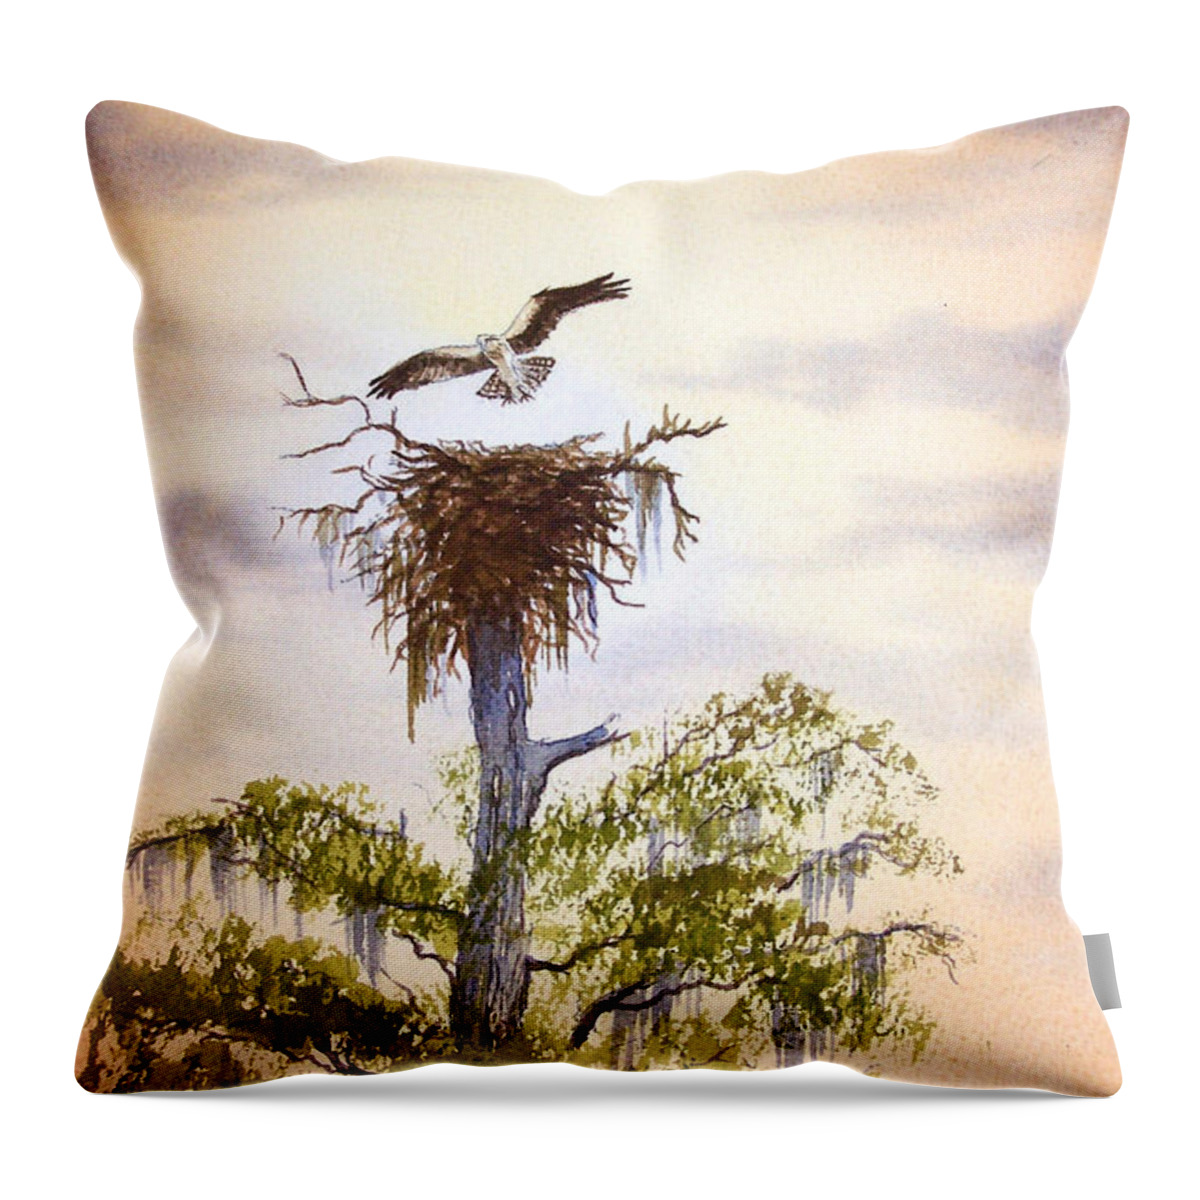 Osprey Throw Pillow featuring the painting Osprey Approaching Nest by Bill Holkham